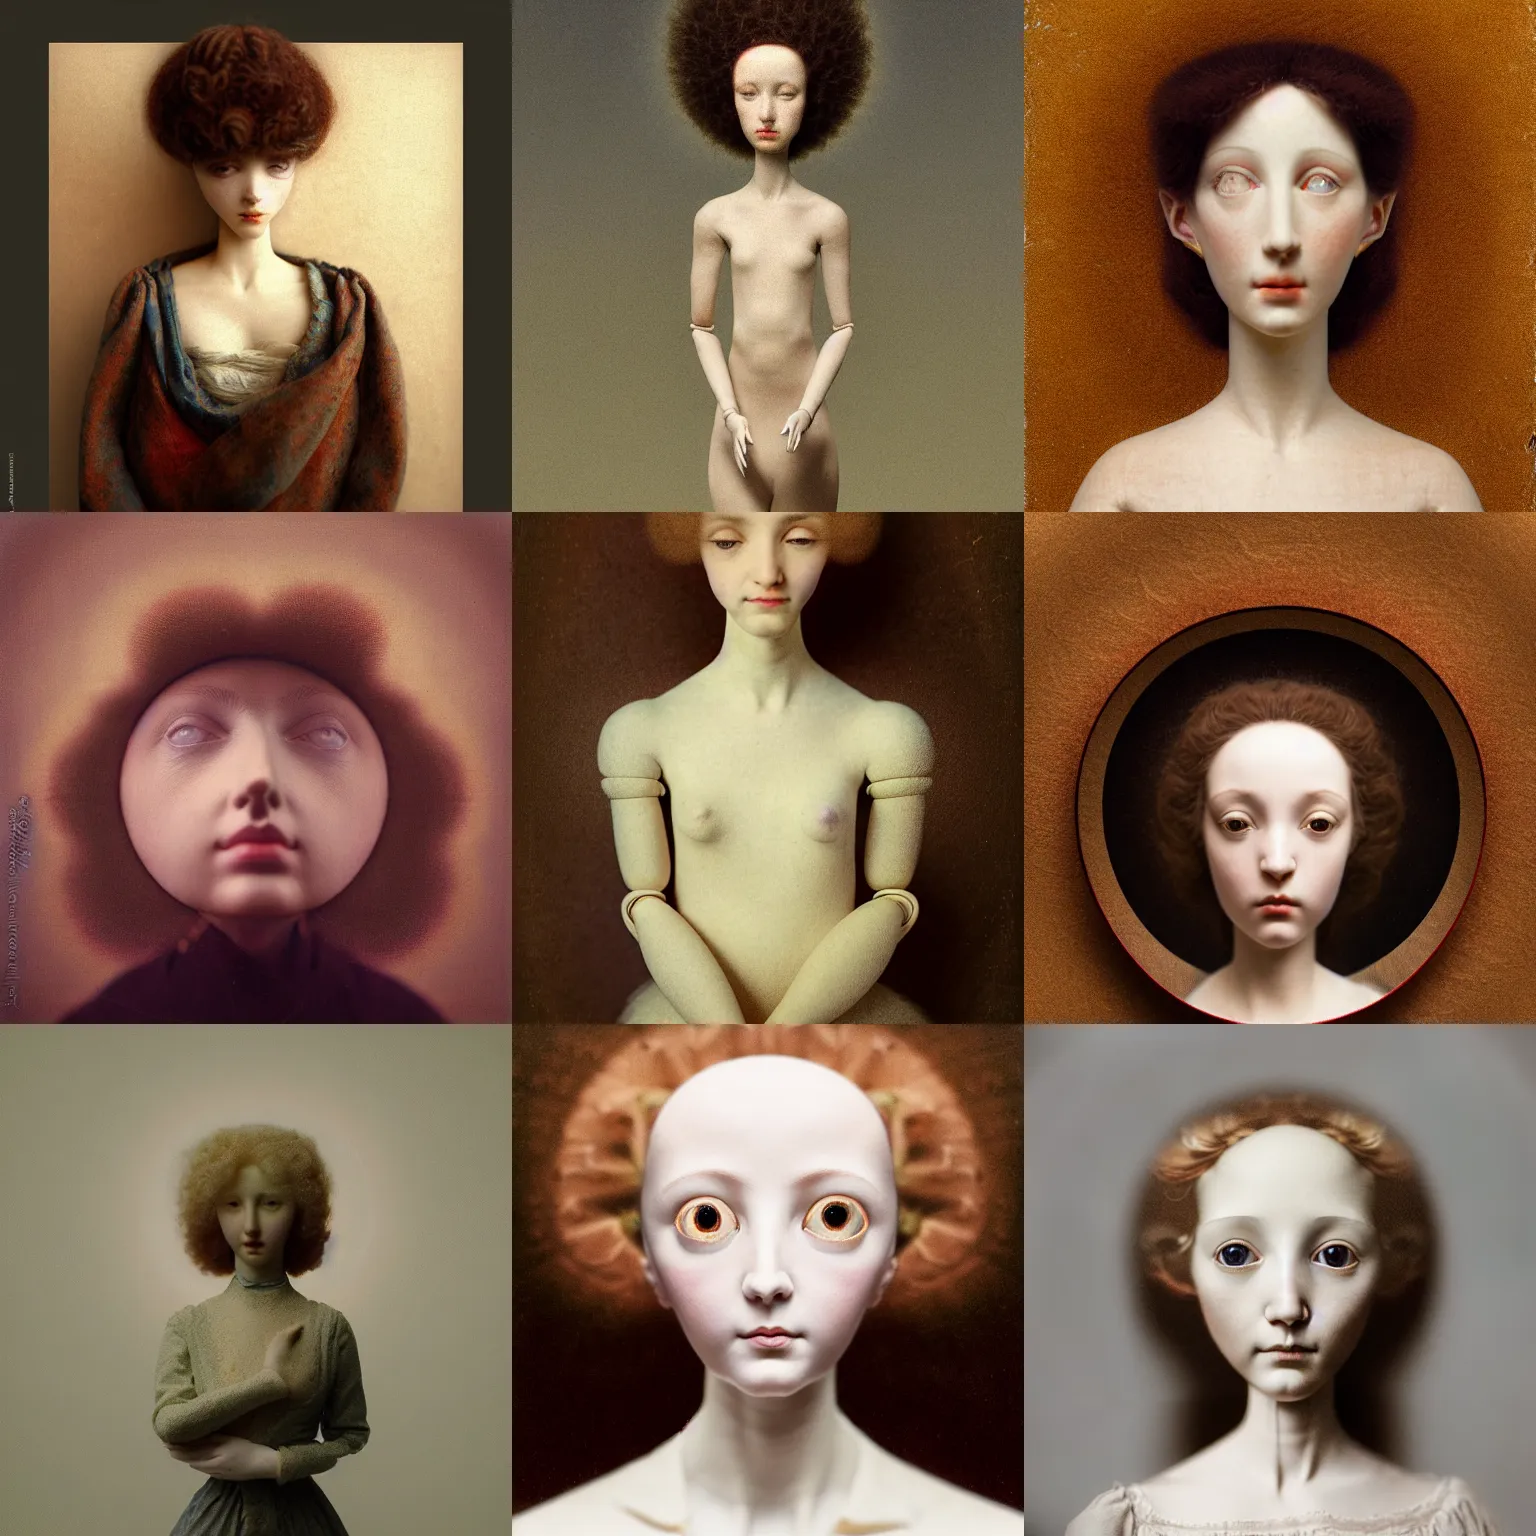 Prompt: circular fisheye photo portrait of a beautiful female jointed art doll, holding each other, 8 mm wide angle lens, distorted perspective, by agostino arrivabene, by fernand khnopff, by rembrandt, rendered in octane, photography, photorealistic, surreal, crying, mysterious